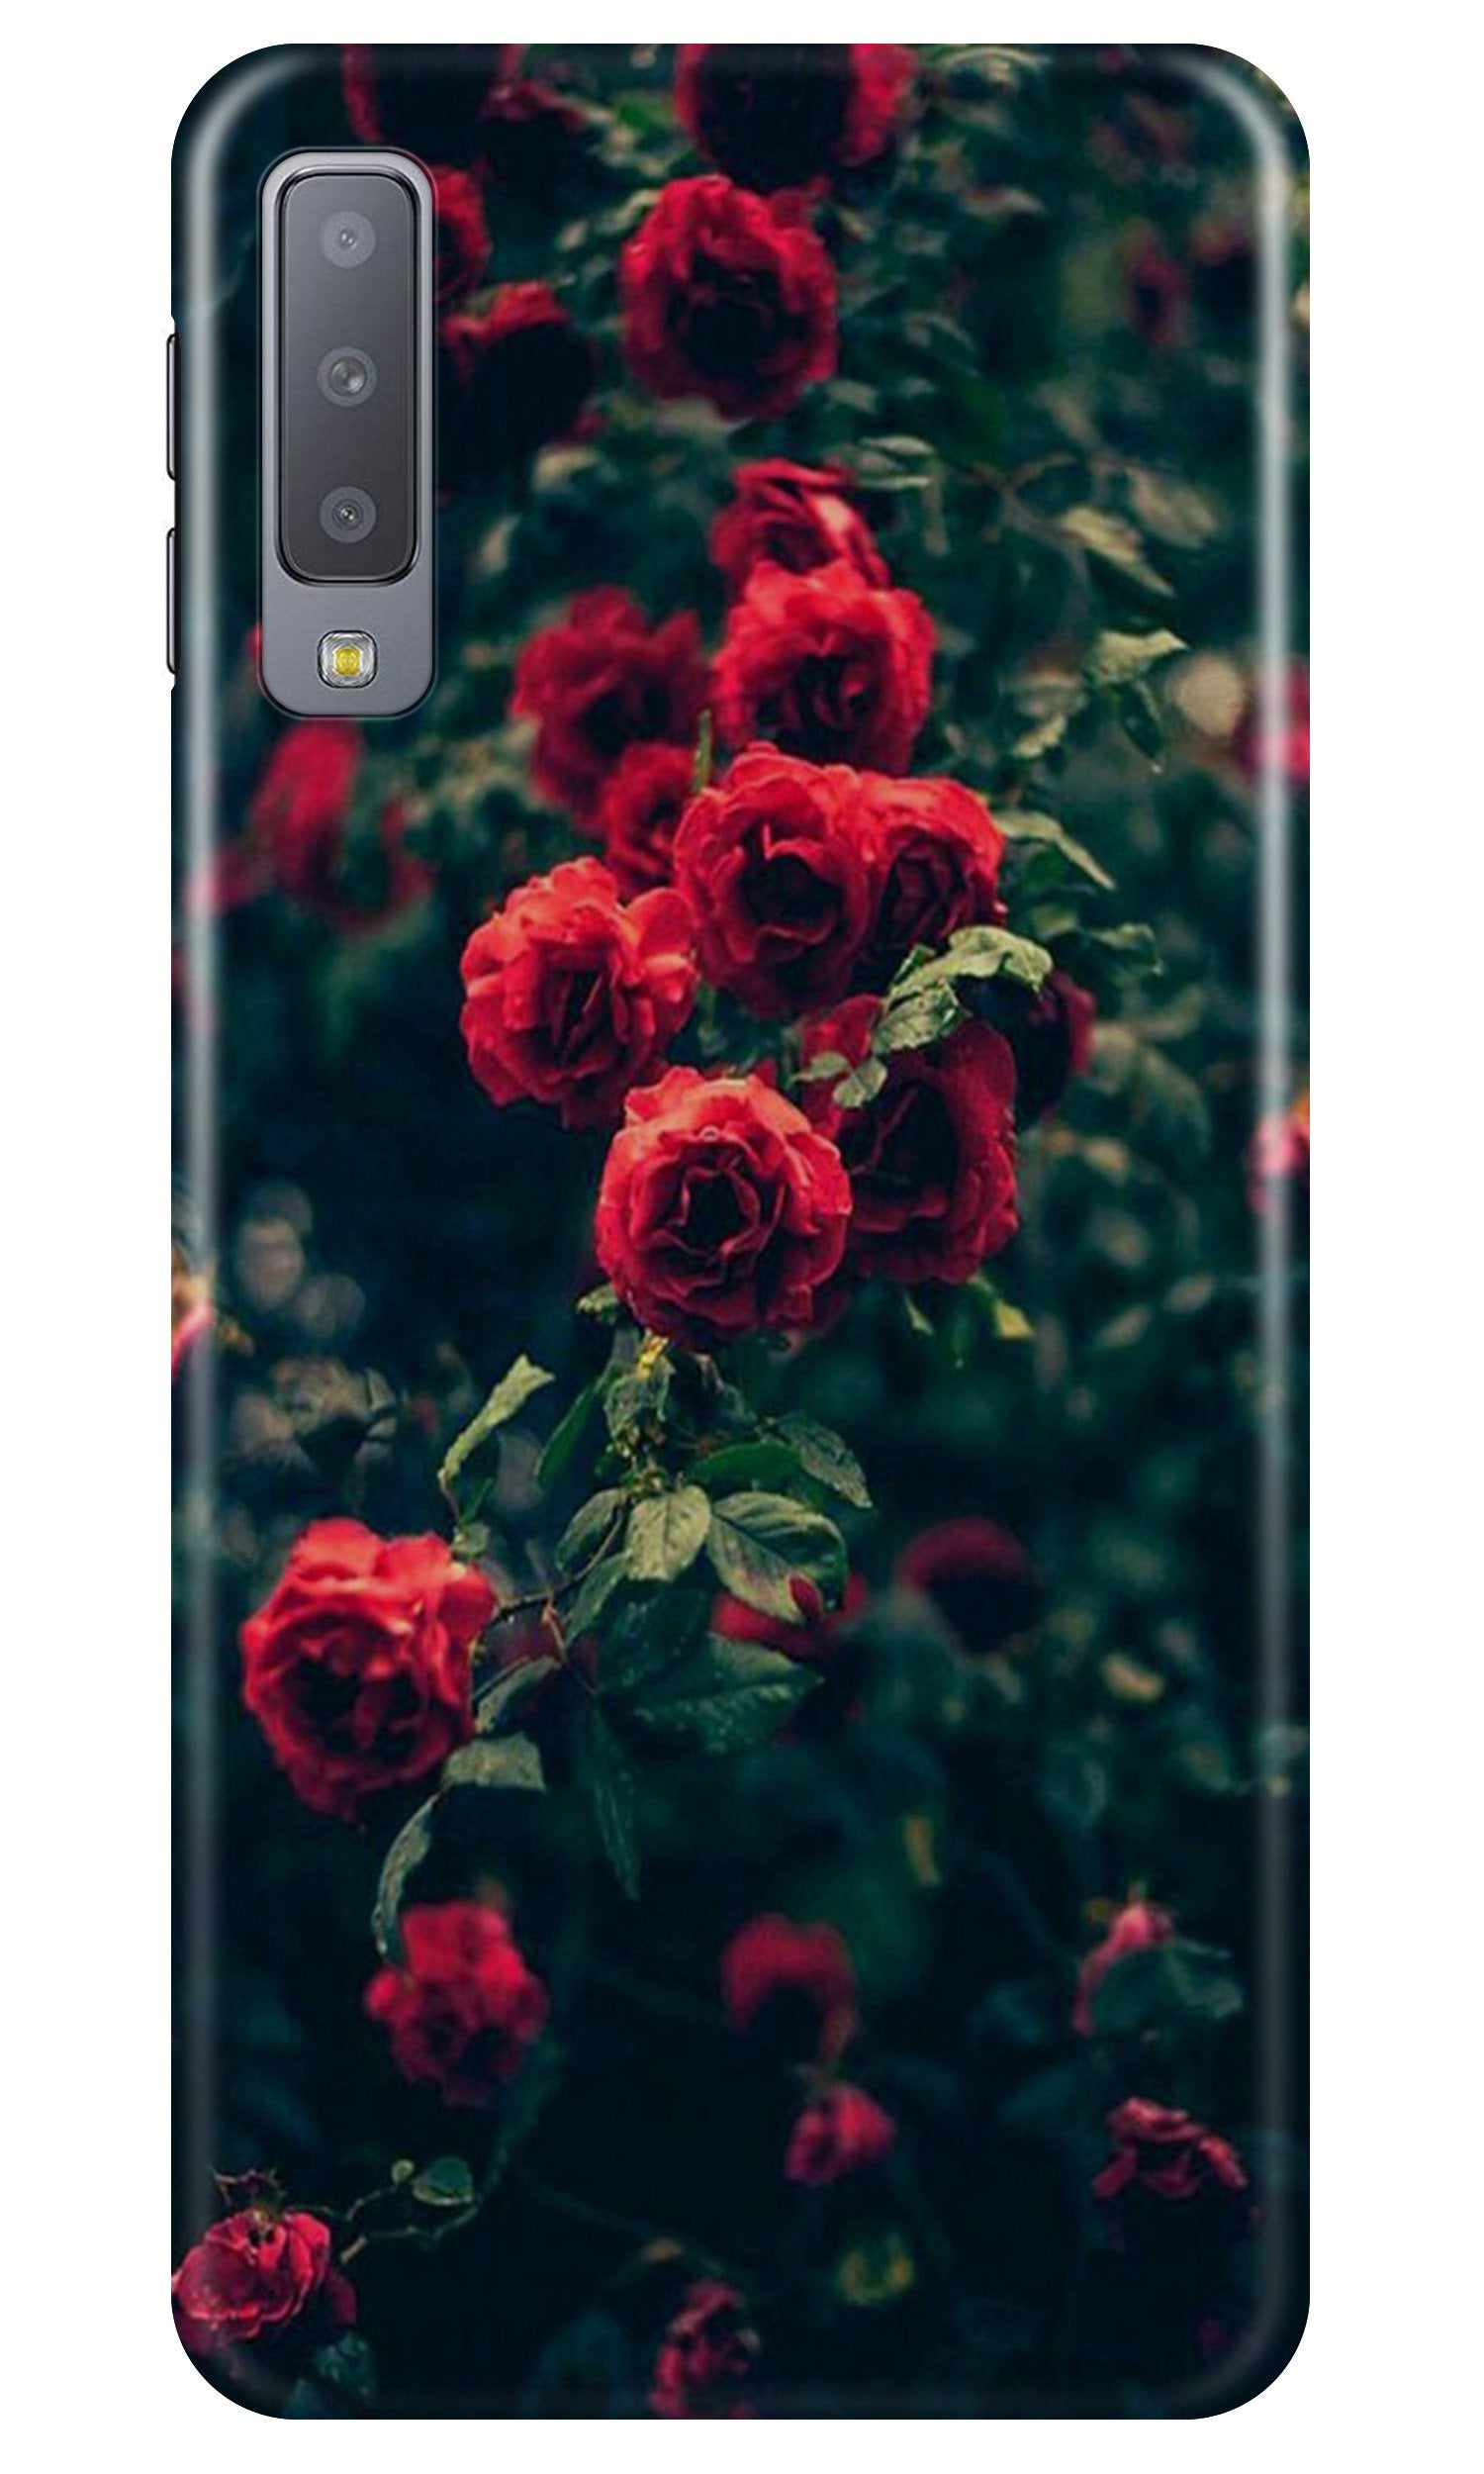 Red Rose Case for Samung Galaxy A70s